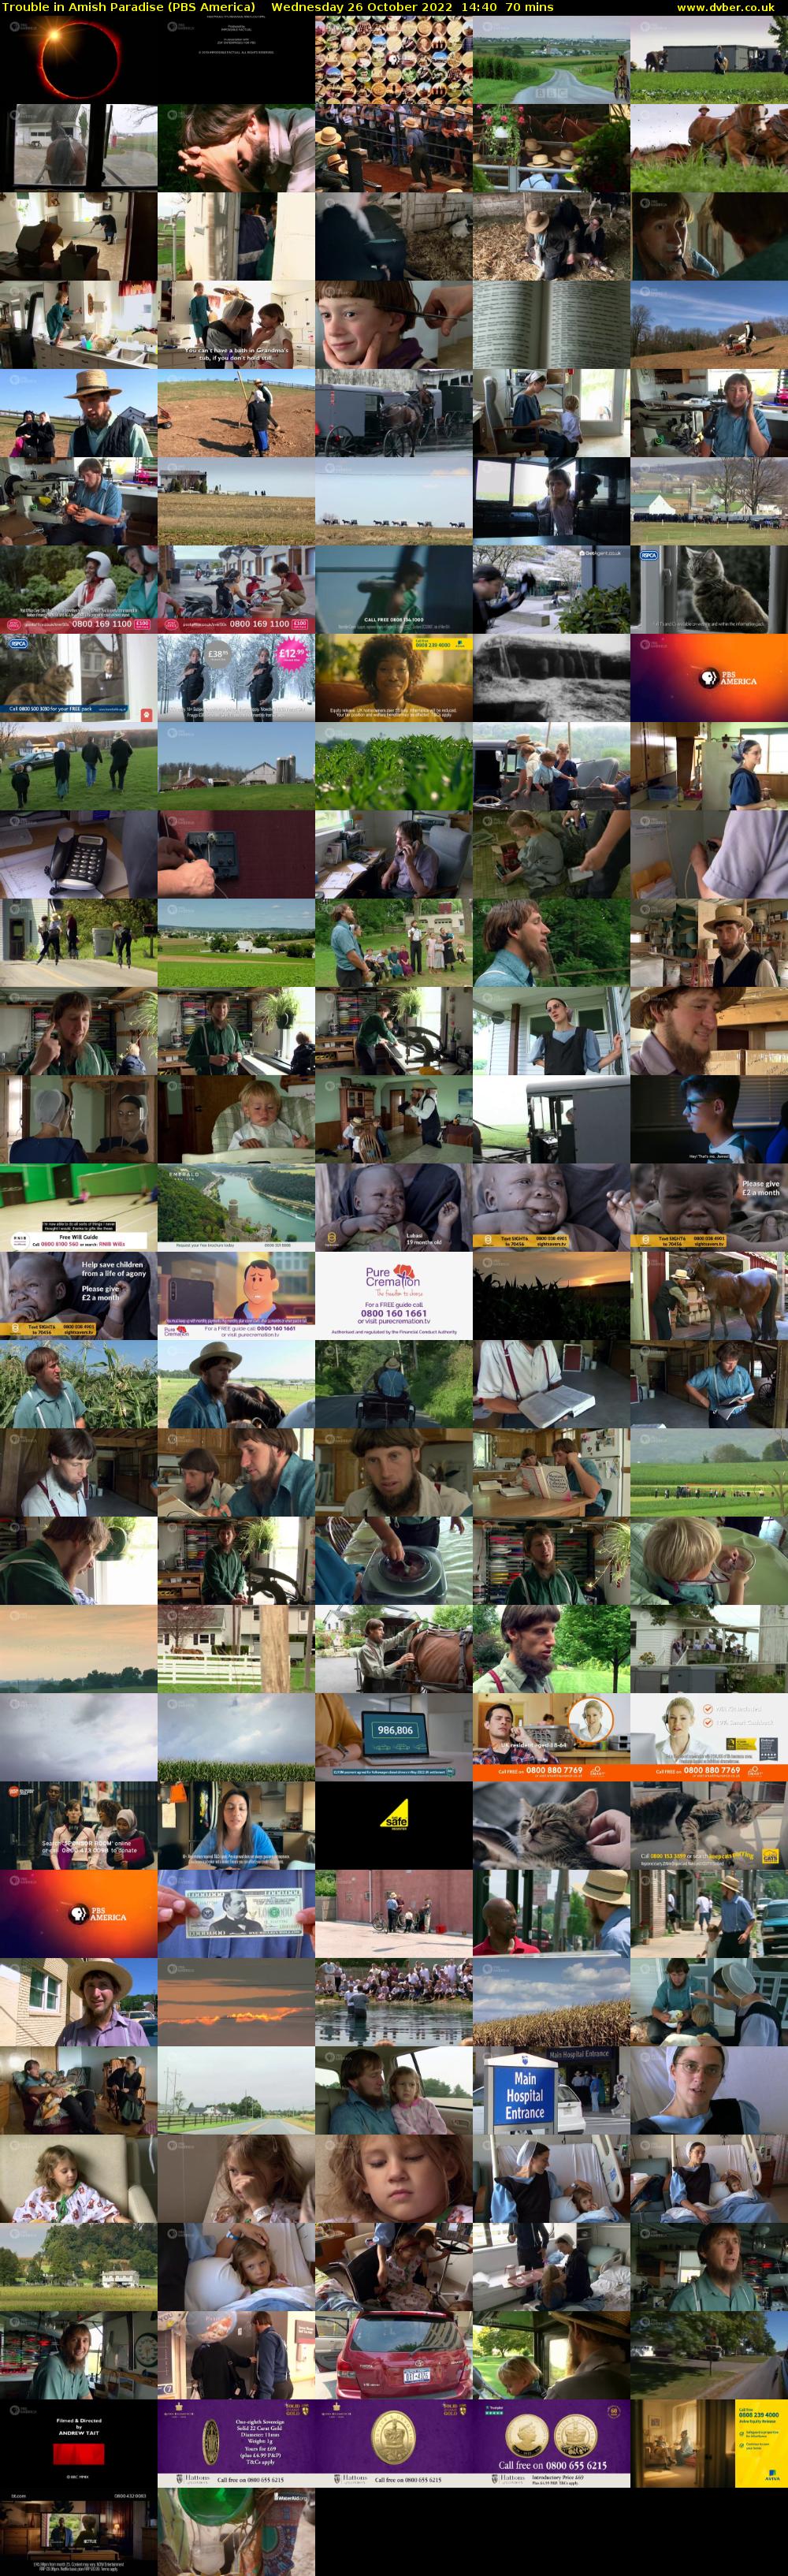 Trouble in Amish Paradise (PBS America) Wednesday 26 October 2022 14:40 - 15:50